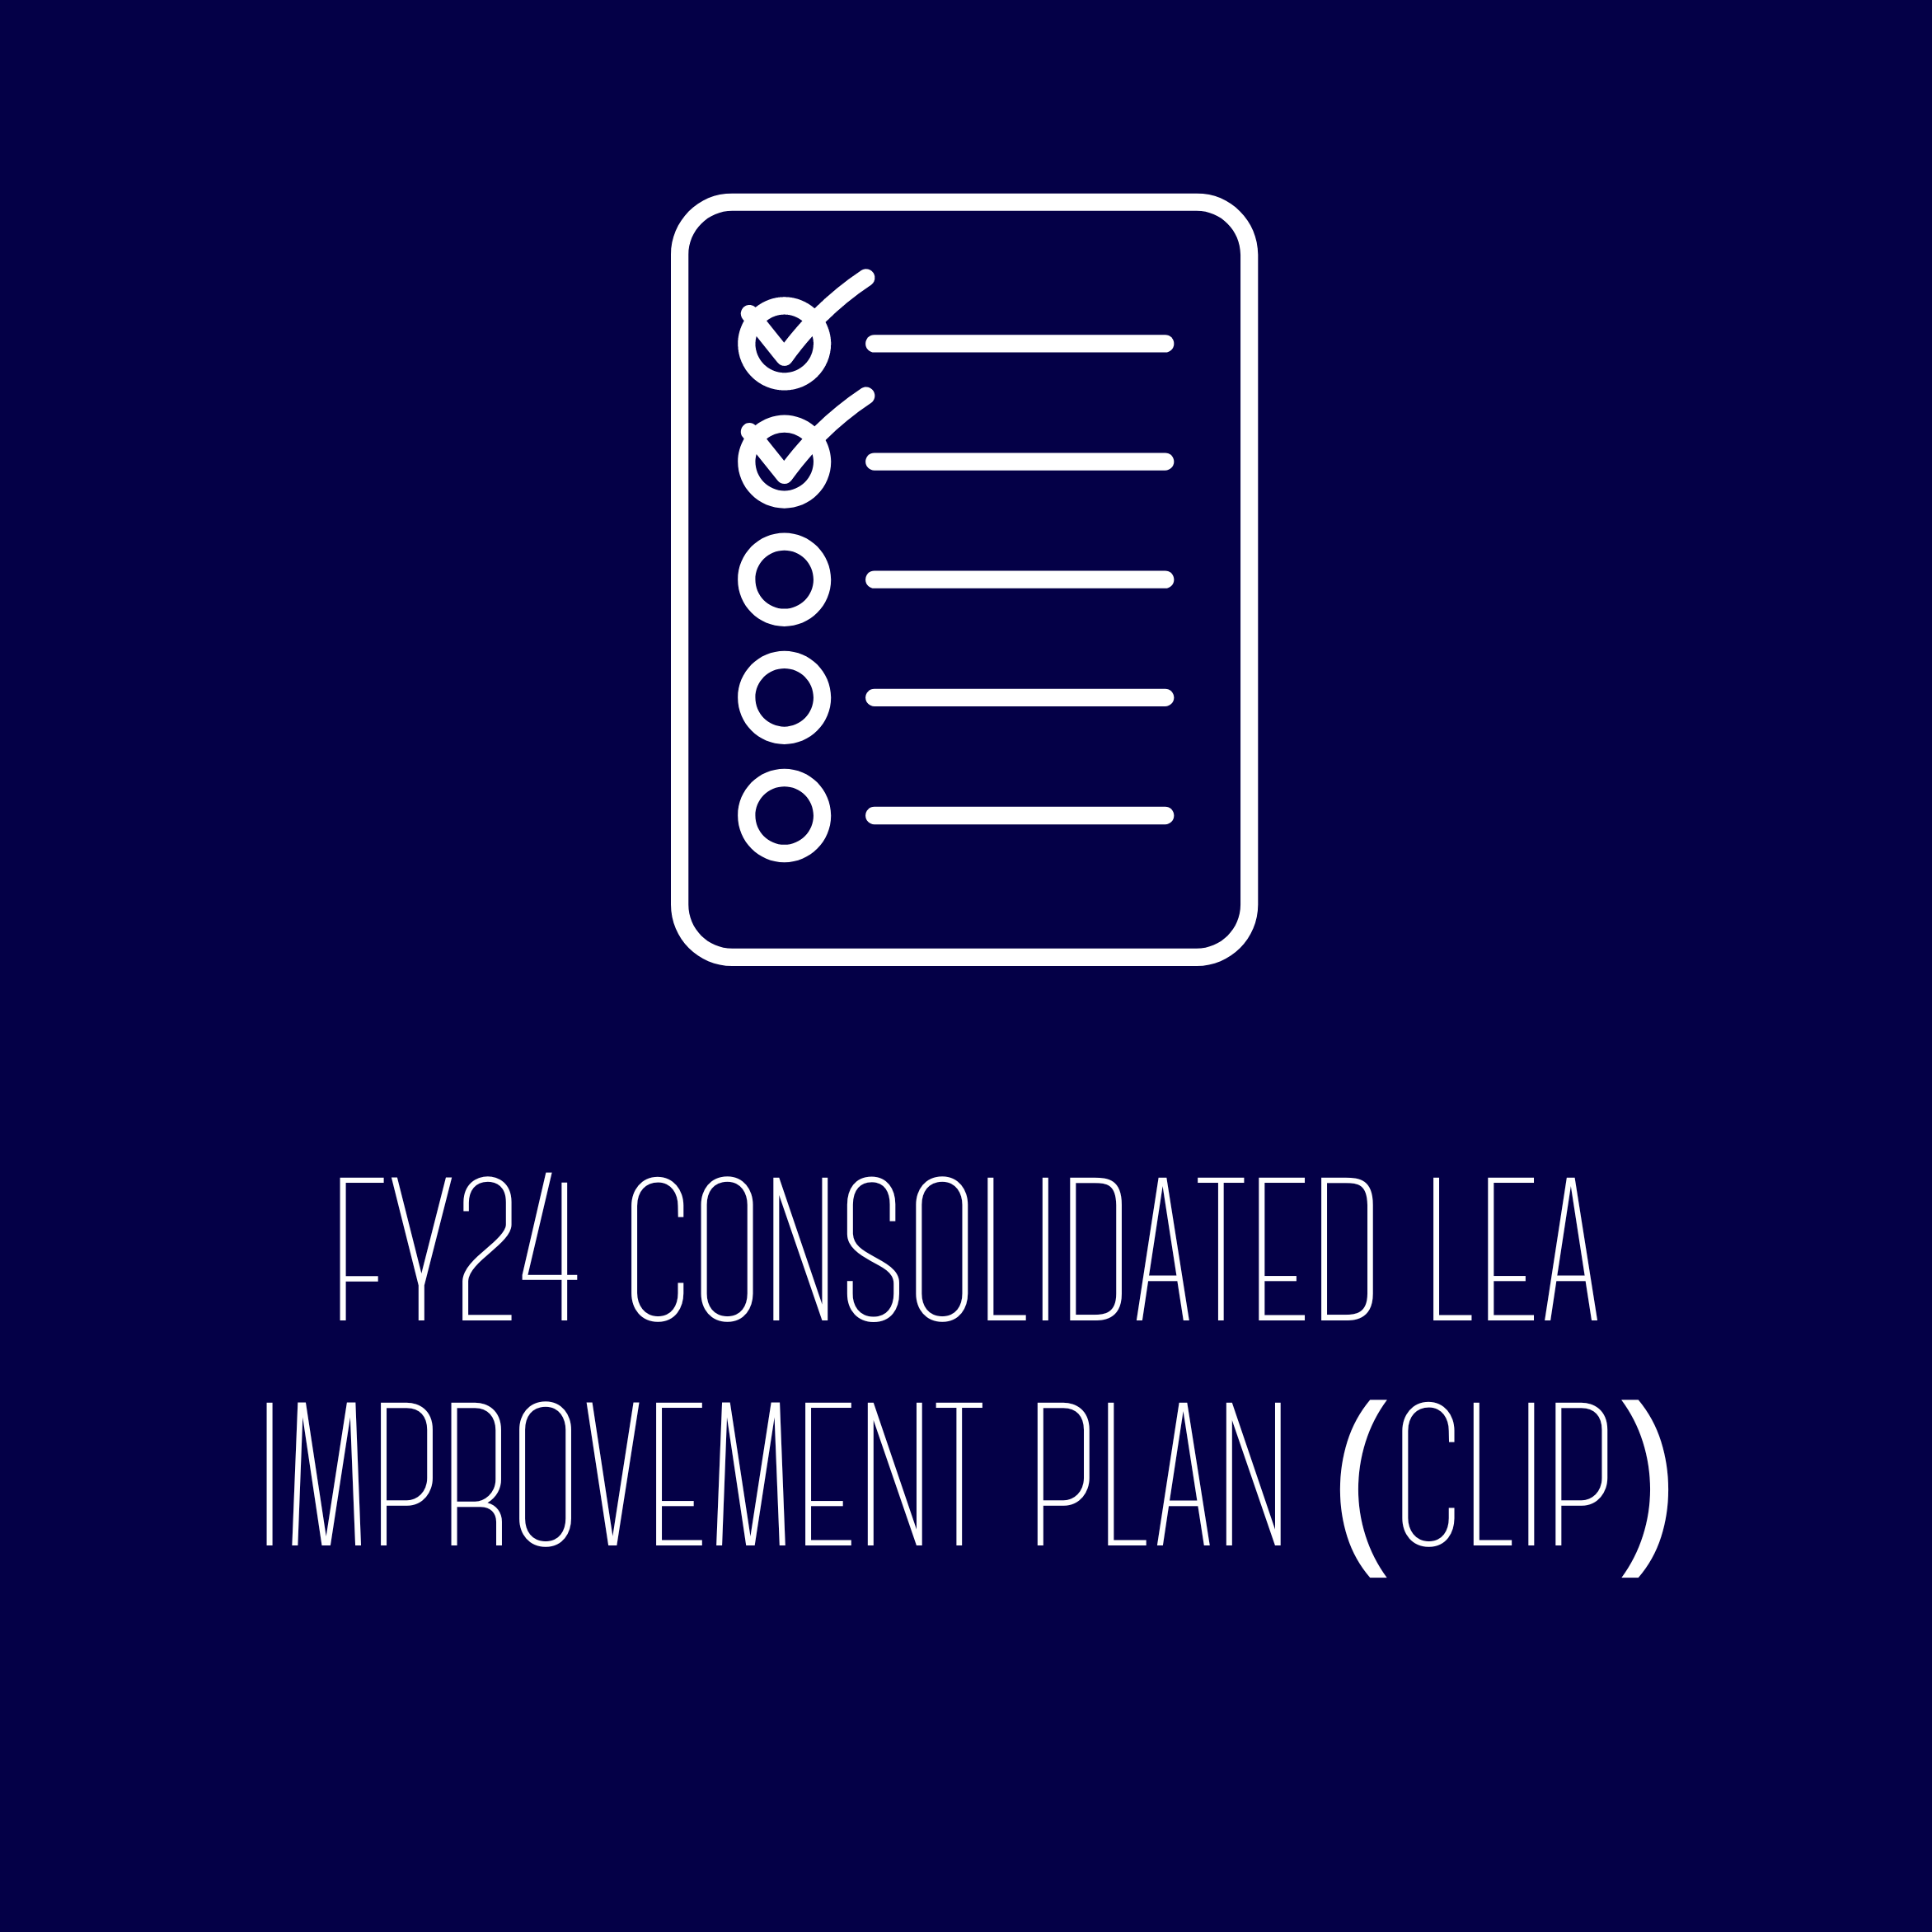 FY 24 Consolidated LEA Clip